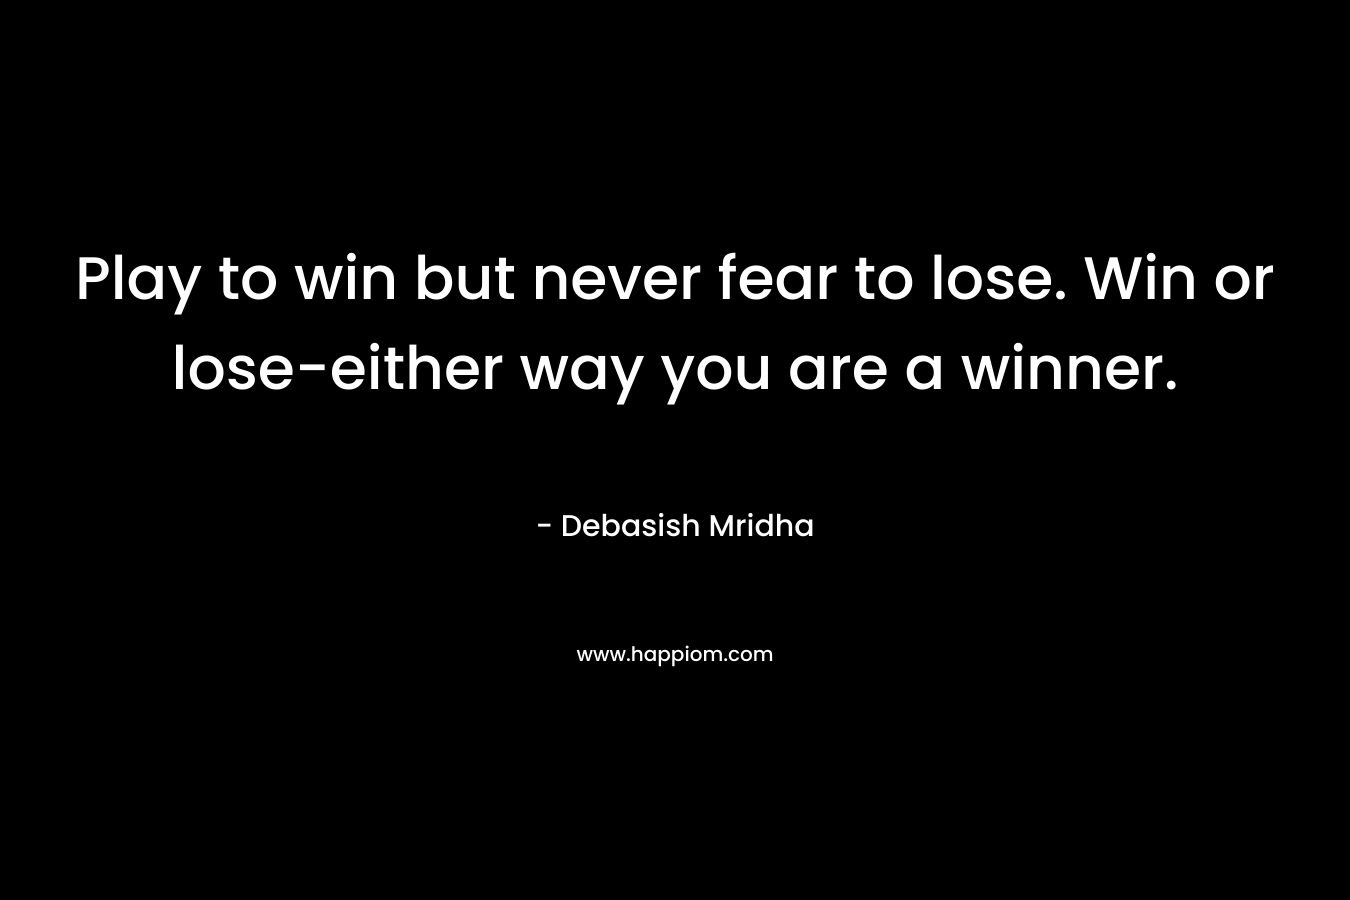 Play to win but never fear to lose. Win or lose-either way you are a winner. – Debasish Mridha